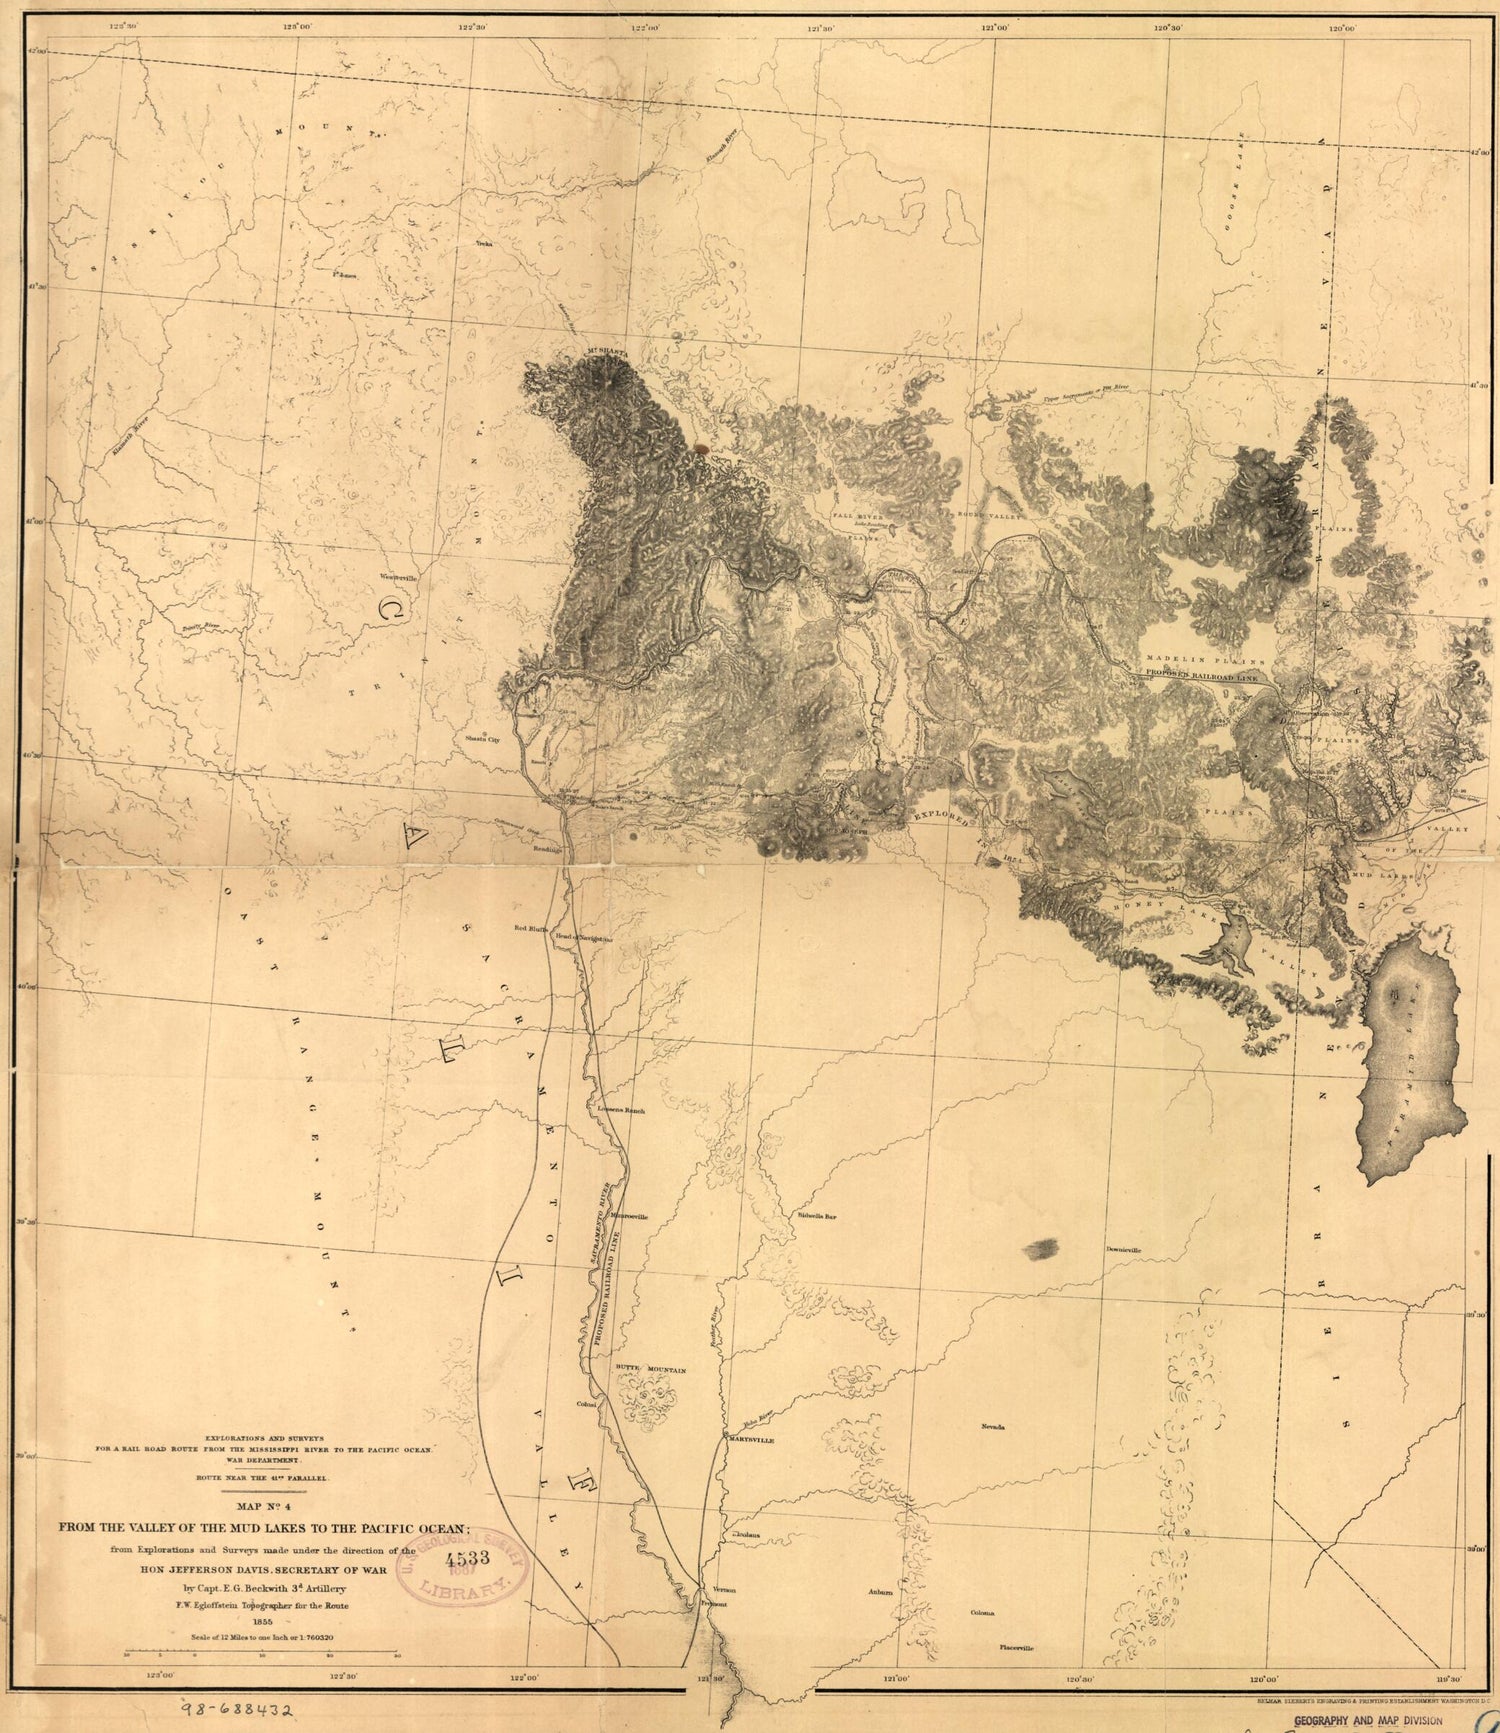 This old map of From the Valley of the Mud Lakes to the Pacific Ocean from 1855 was created by E. G. (Edward Griffin) Beckwith, Jefferson Davis, F. W. Egloffstein, Selmar Siebert,  United States. War Department in 1855